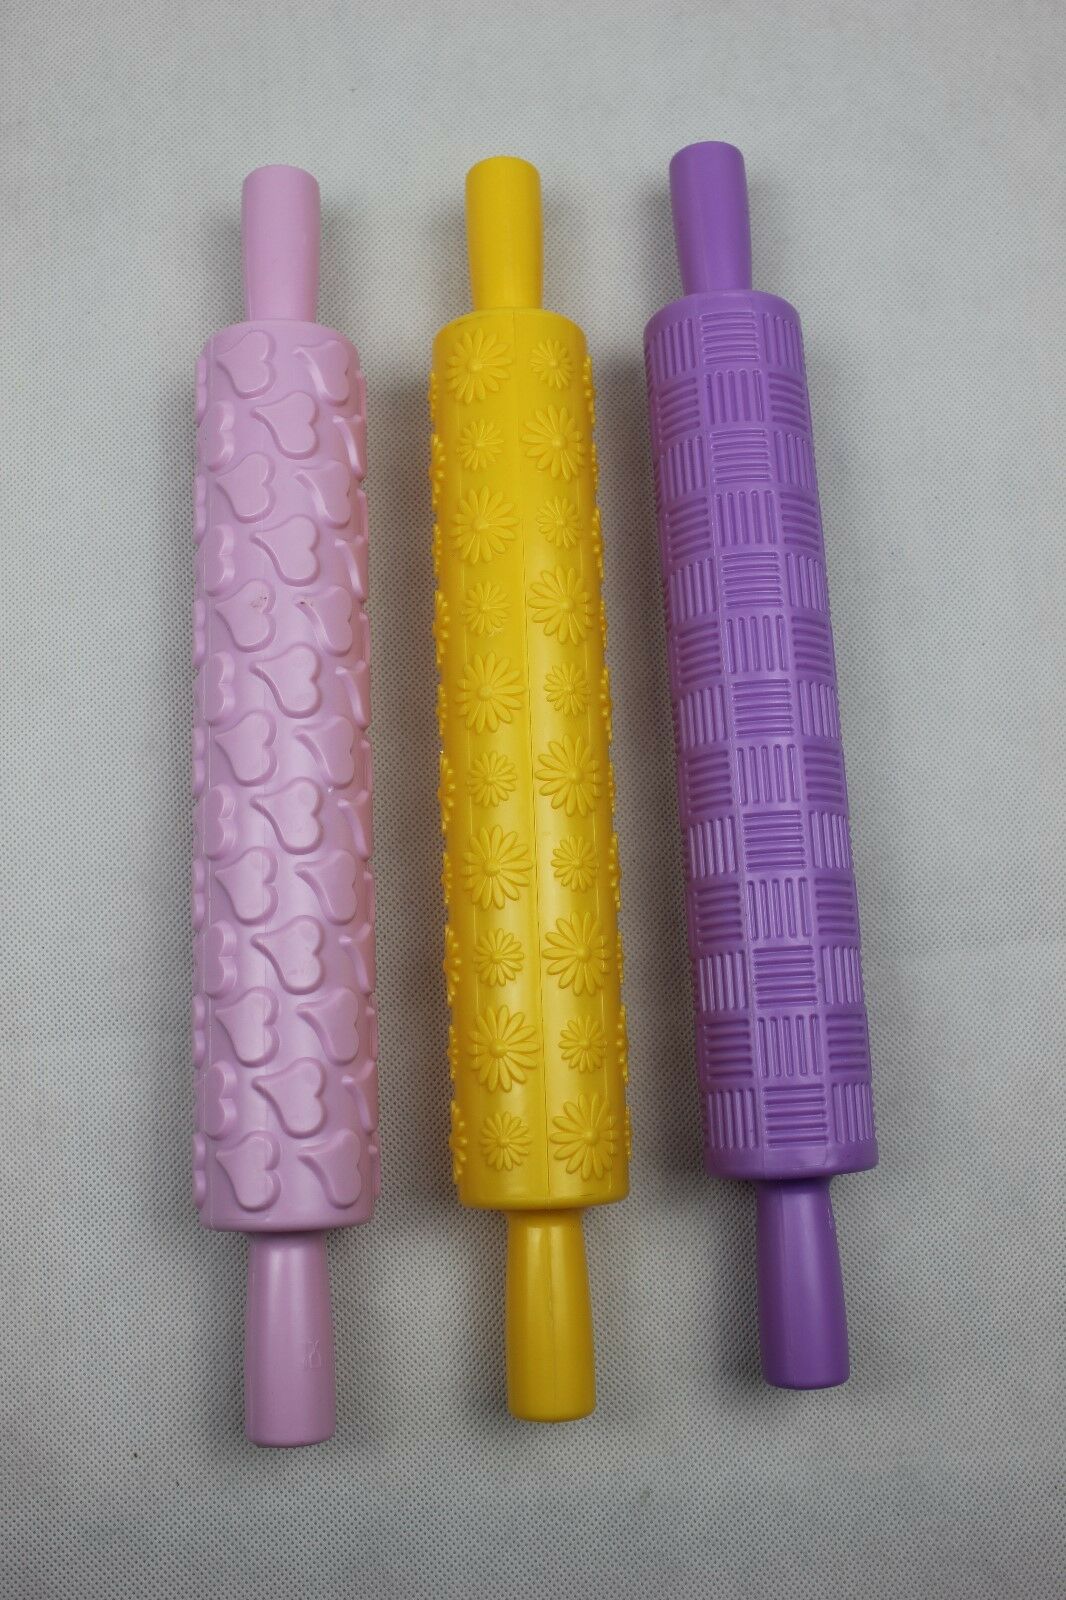 3 x Large Embossed Rolling Pin Patterned Texture Cake Decorating Pastry Tool S2